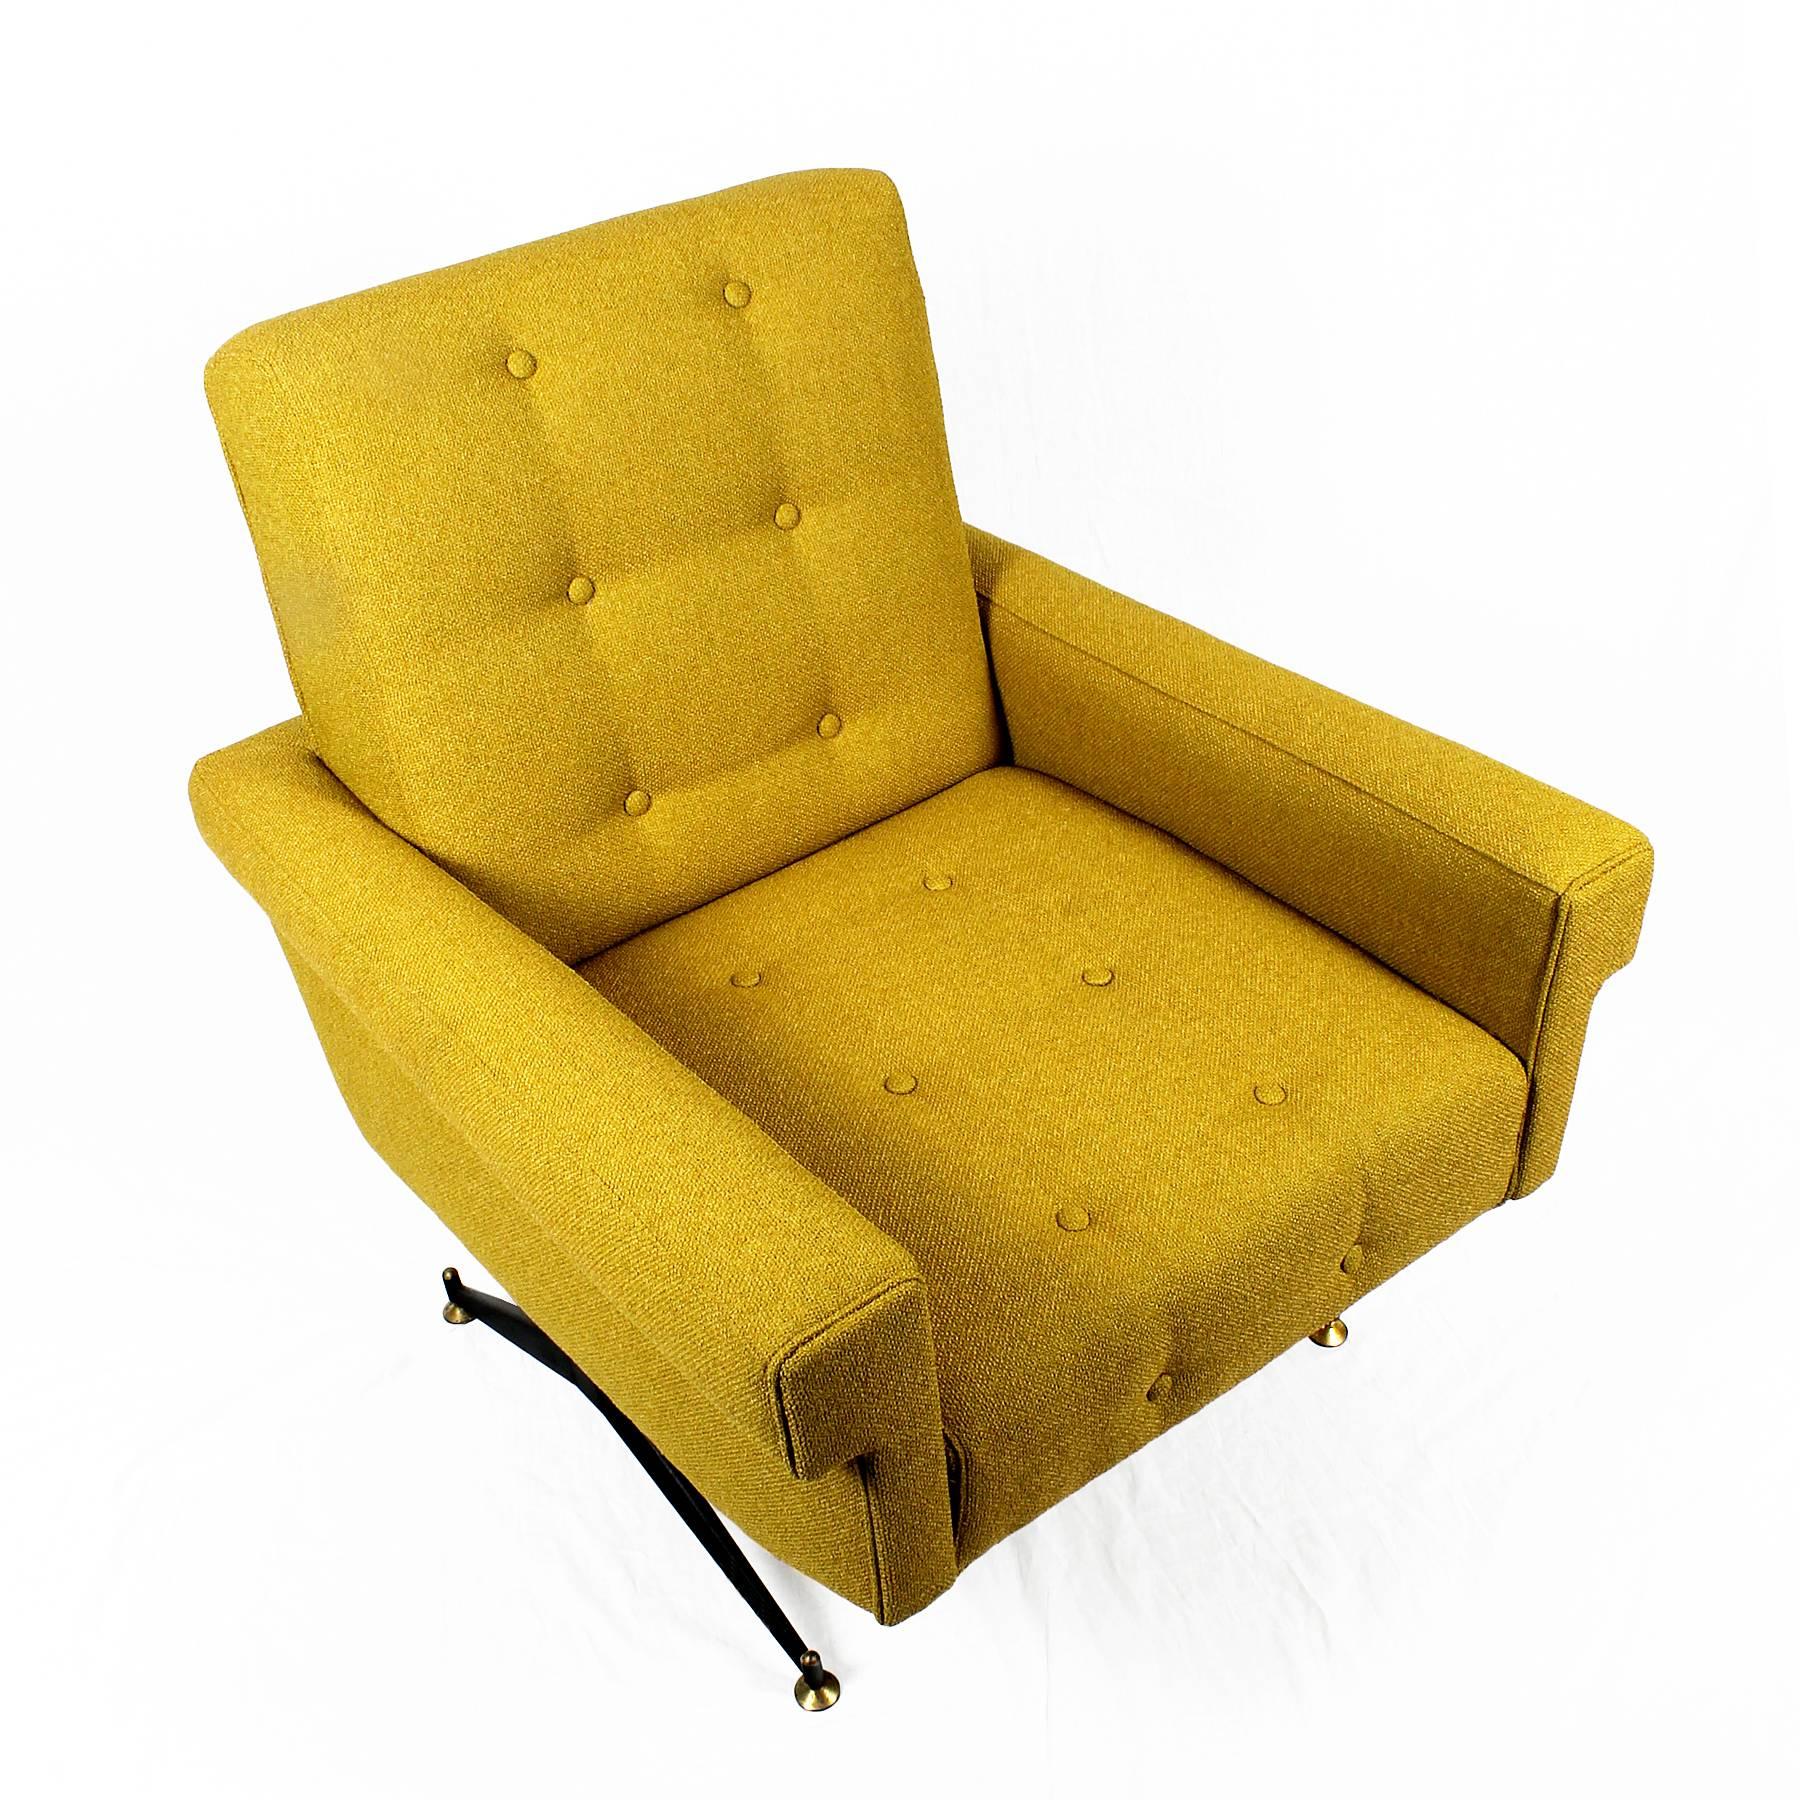 Brass Pair of Mid-Century Modern Padded Armchairs With Yellow-Mustard Fabric - Italy For Sale